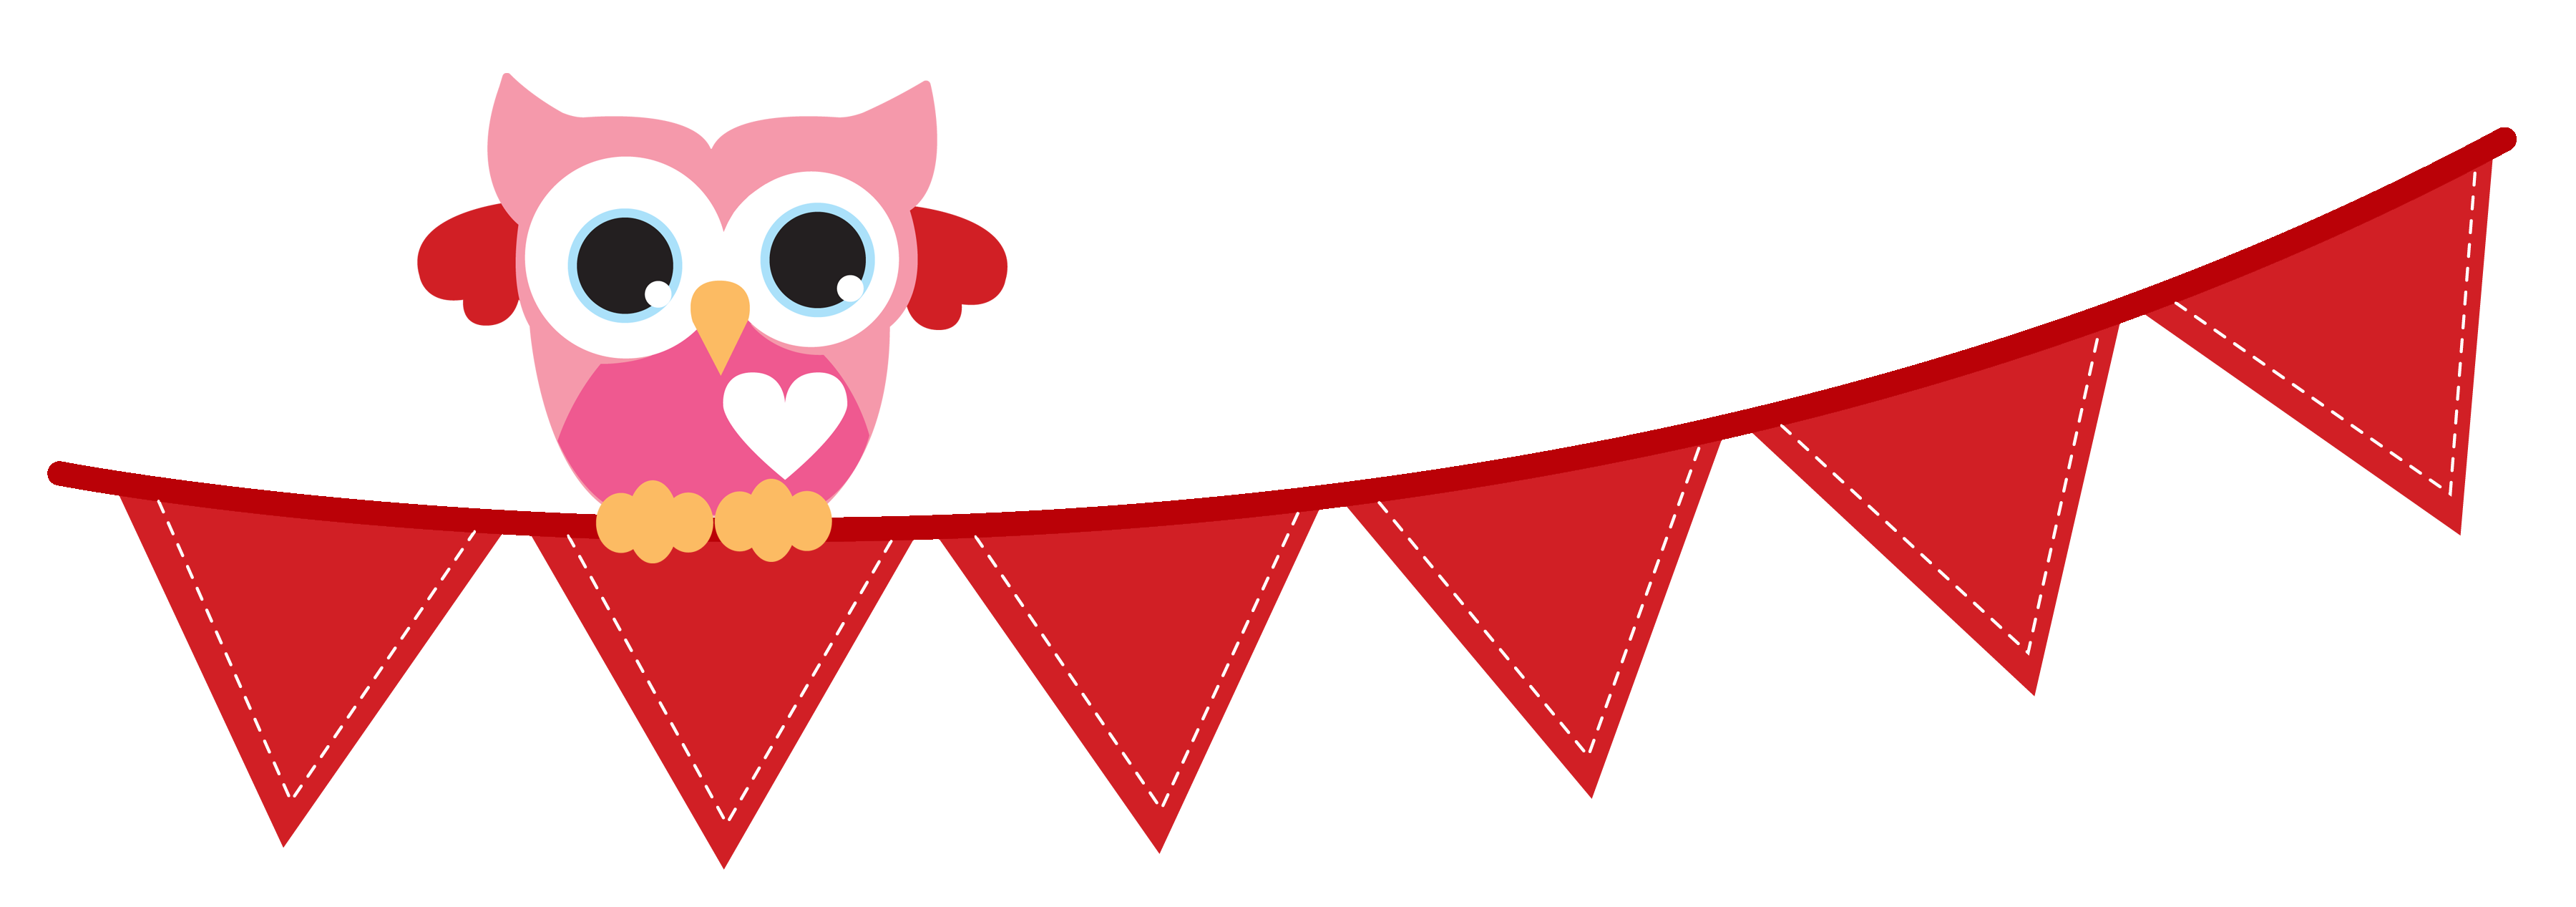 Red bunting flag clipart